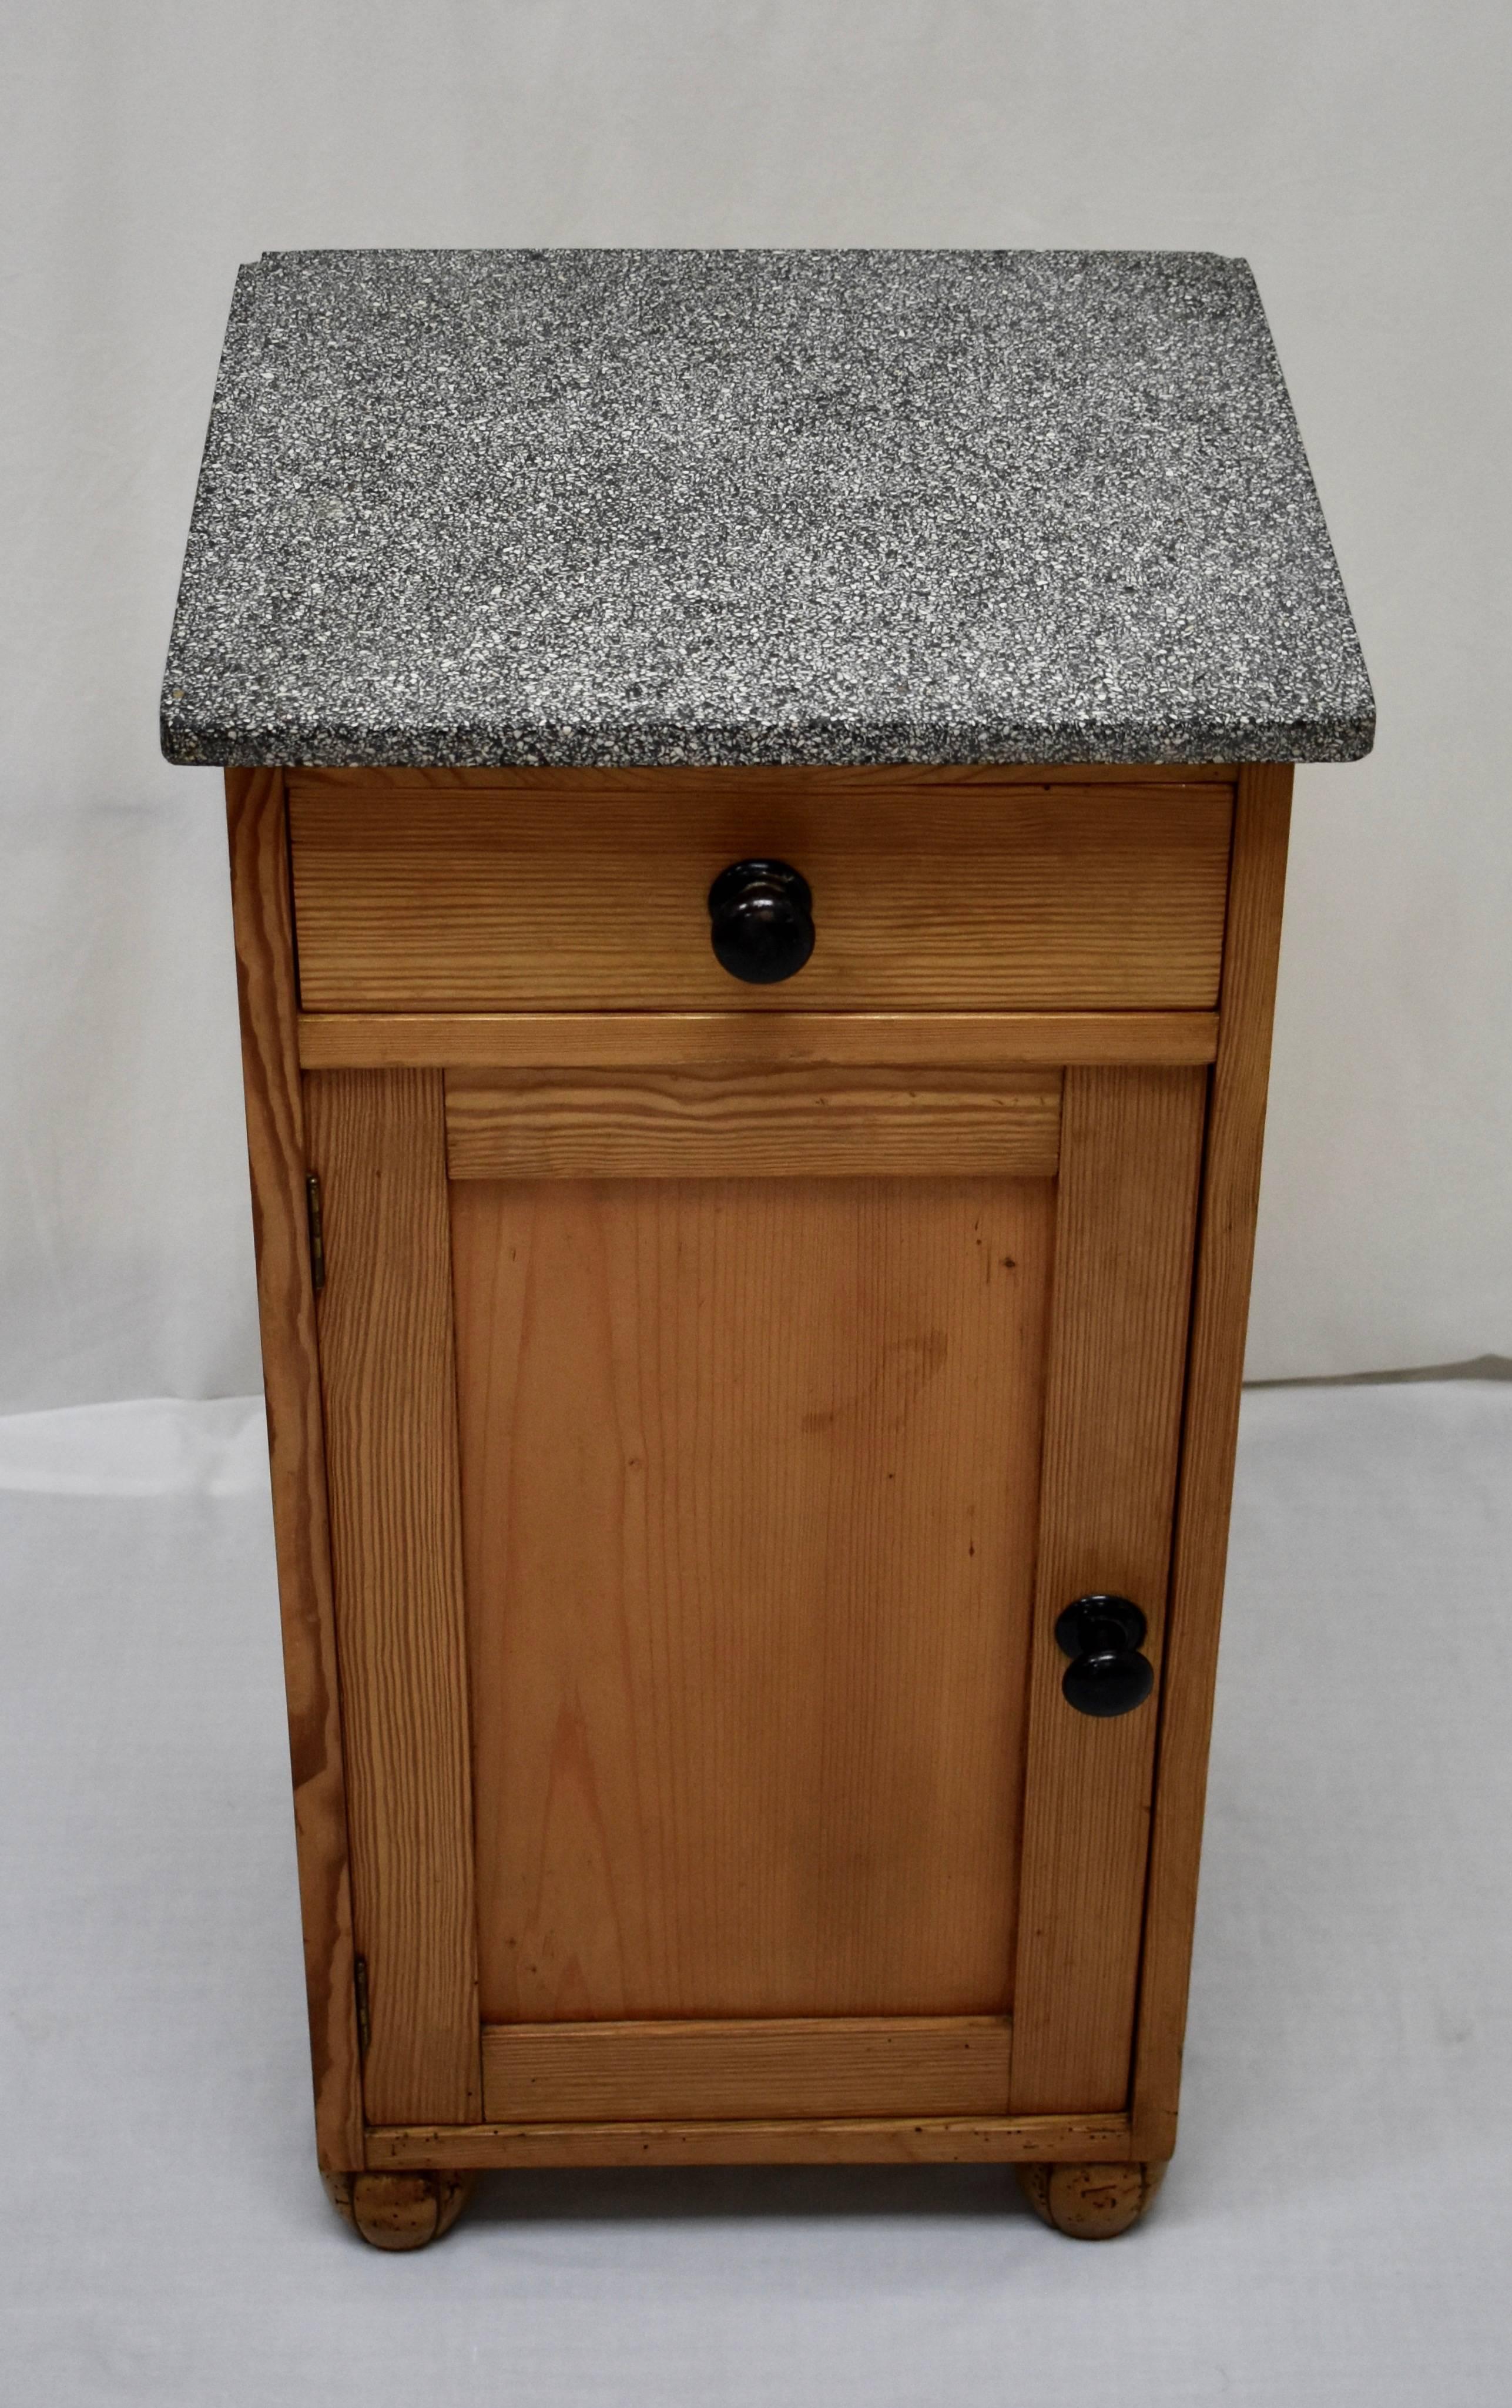 This is a sturdy pine nightstand, in the usual one door, one drawer configuration, with a mottled black and white marble top. The case, with a single dovetailed drawer above a flat paneled door, is without decoration, save for the black metal pulls.